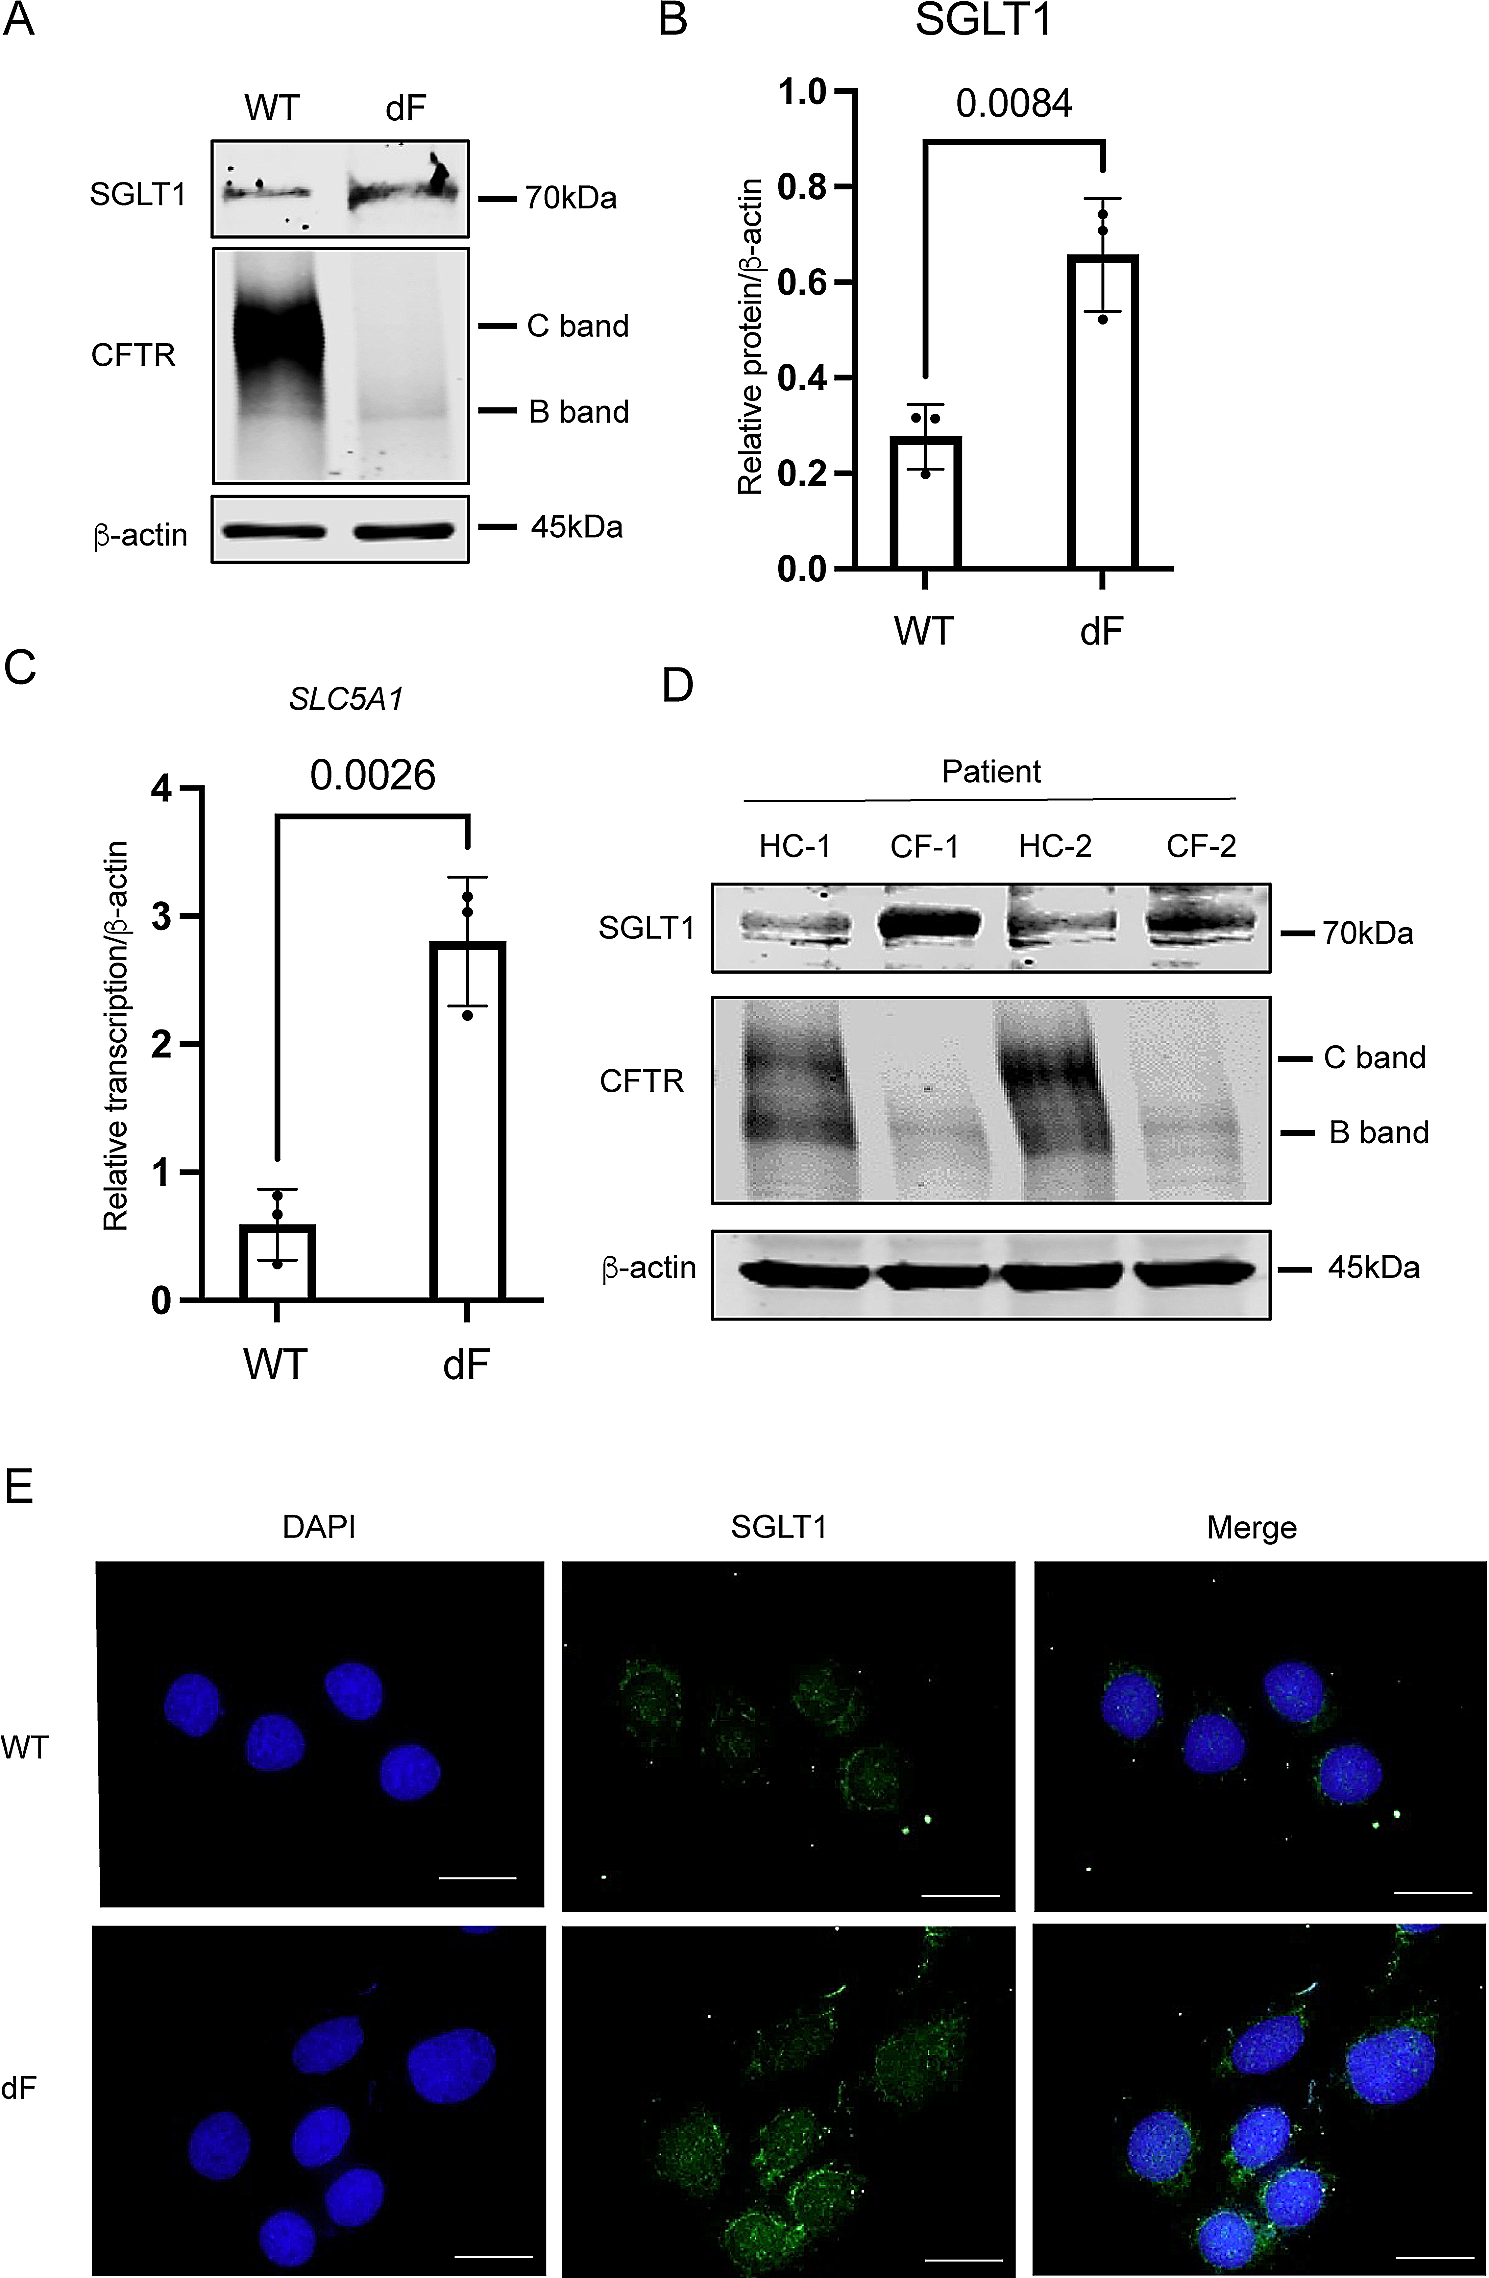 XBP1-mediated transcriptional regulation of SLC5A1 in human epithelial cells in disease conditions